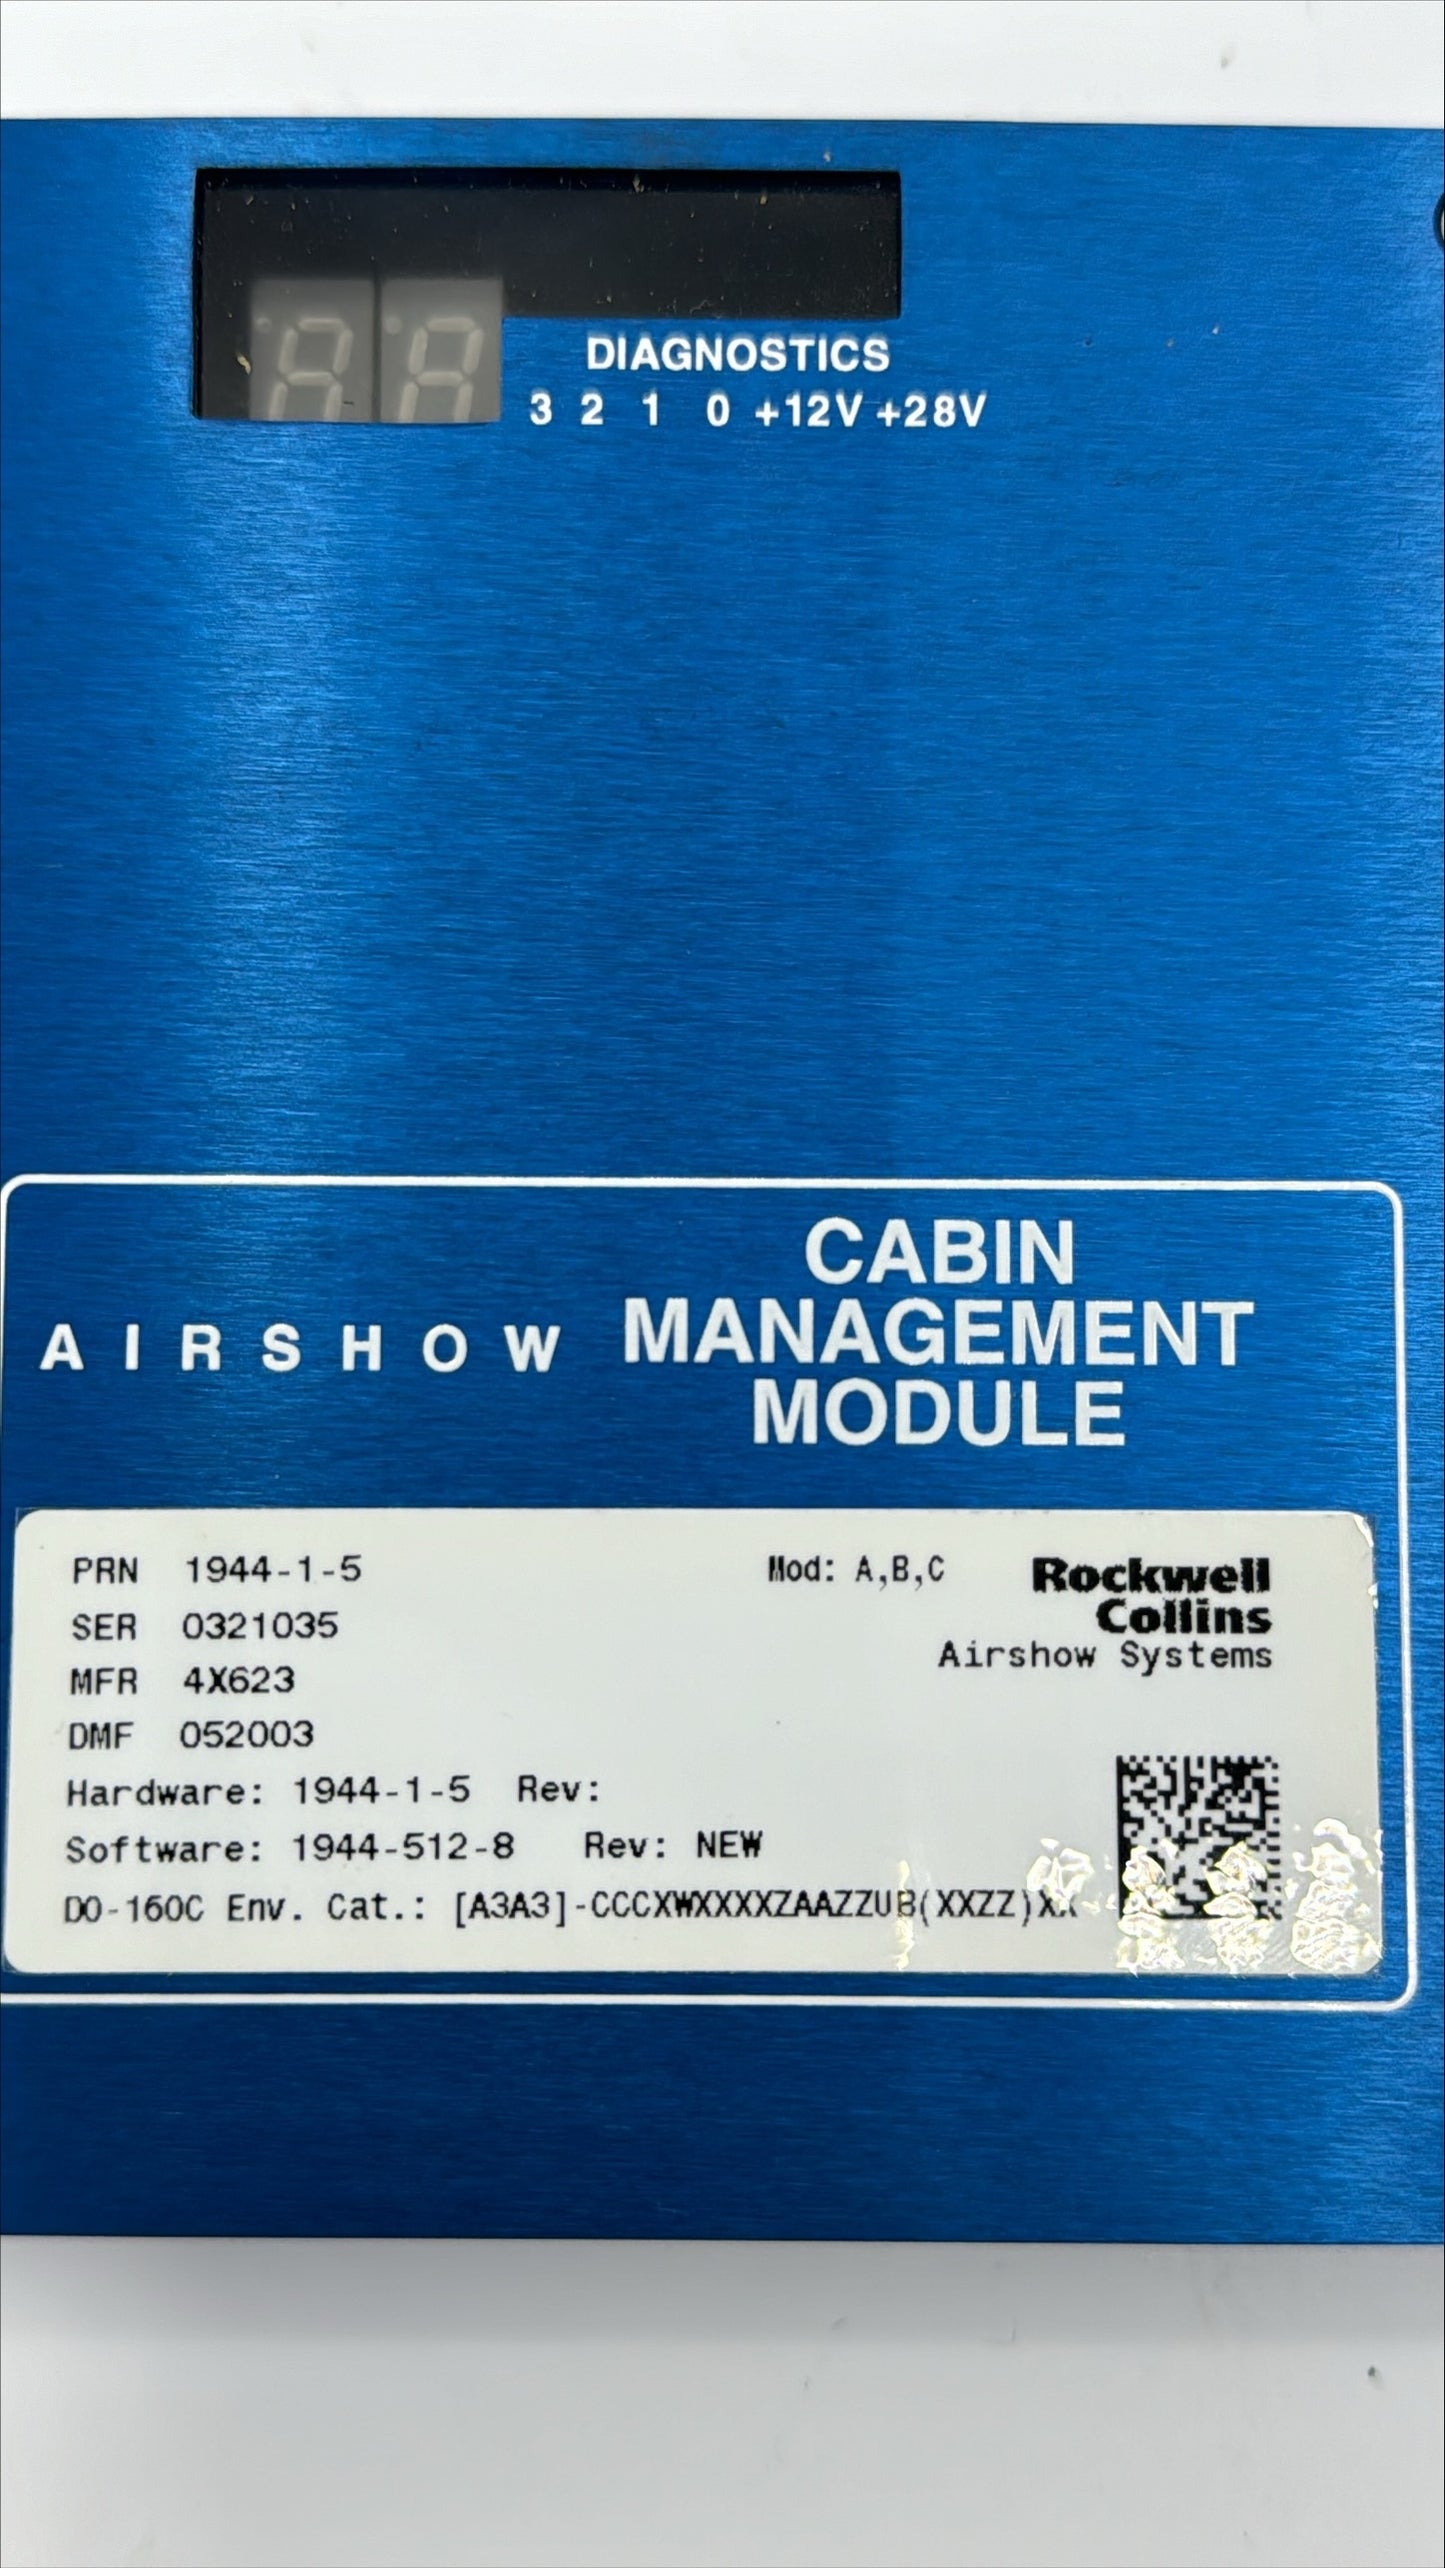 1944-1-5 CABIN MANAGEMENT MODULE COND: REPAIRED 8130-3 ROCKWELL COLLINS